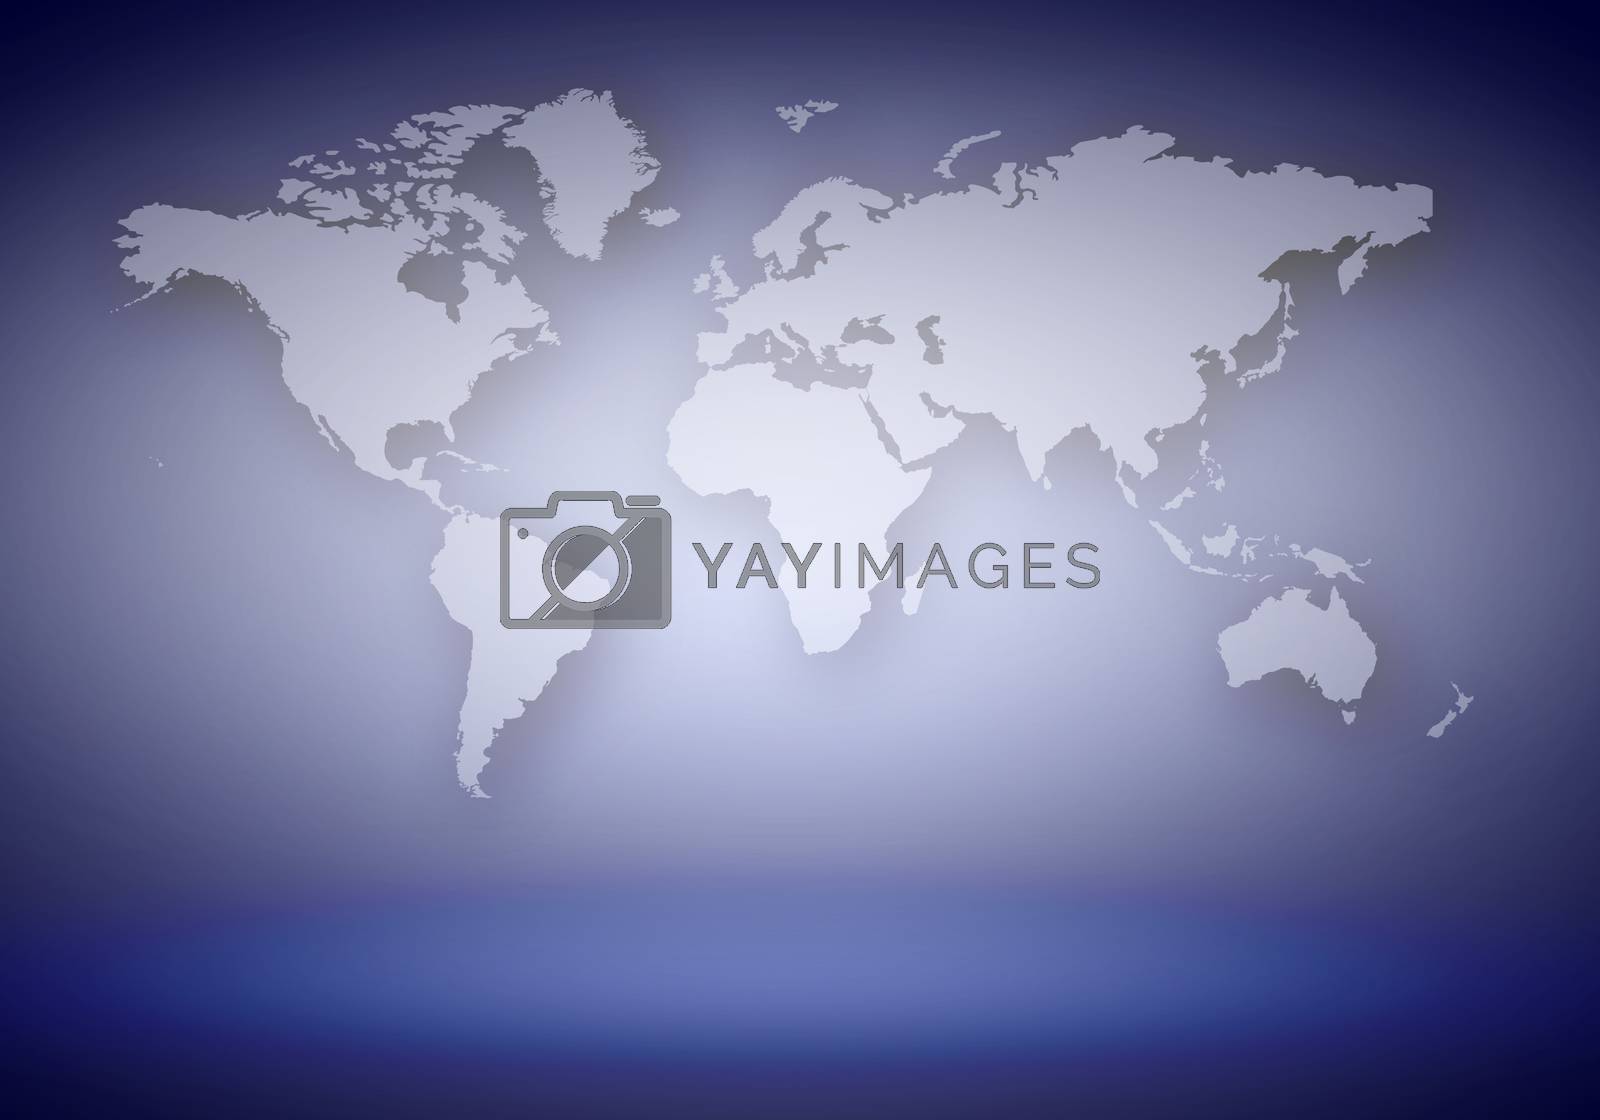 Royalty free image of World map by sergey_nivens